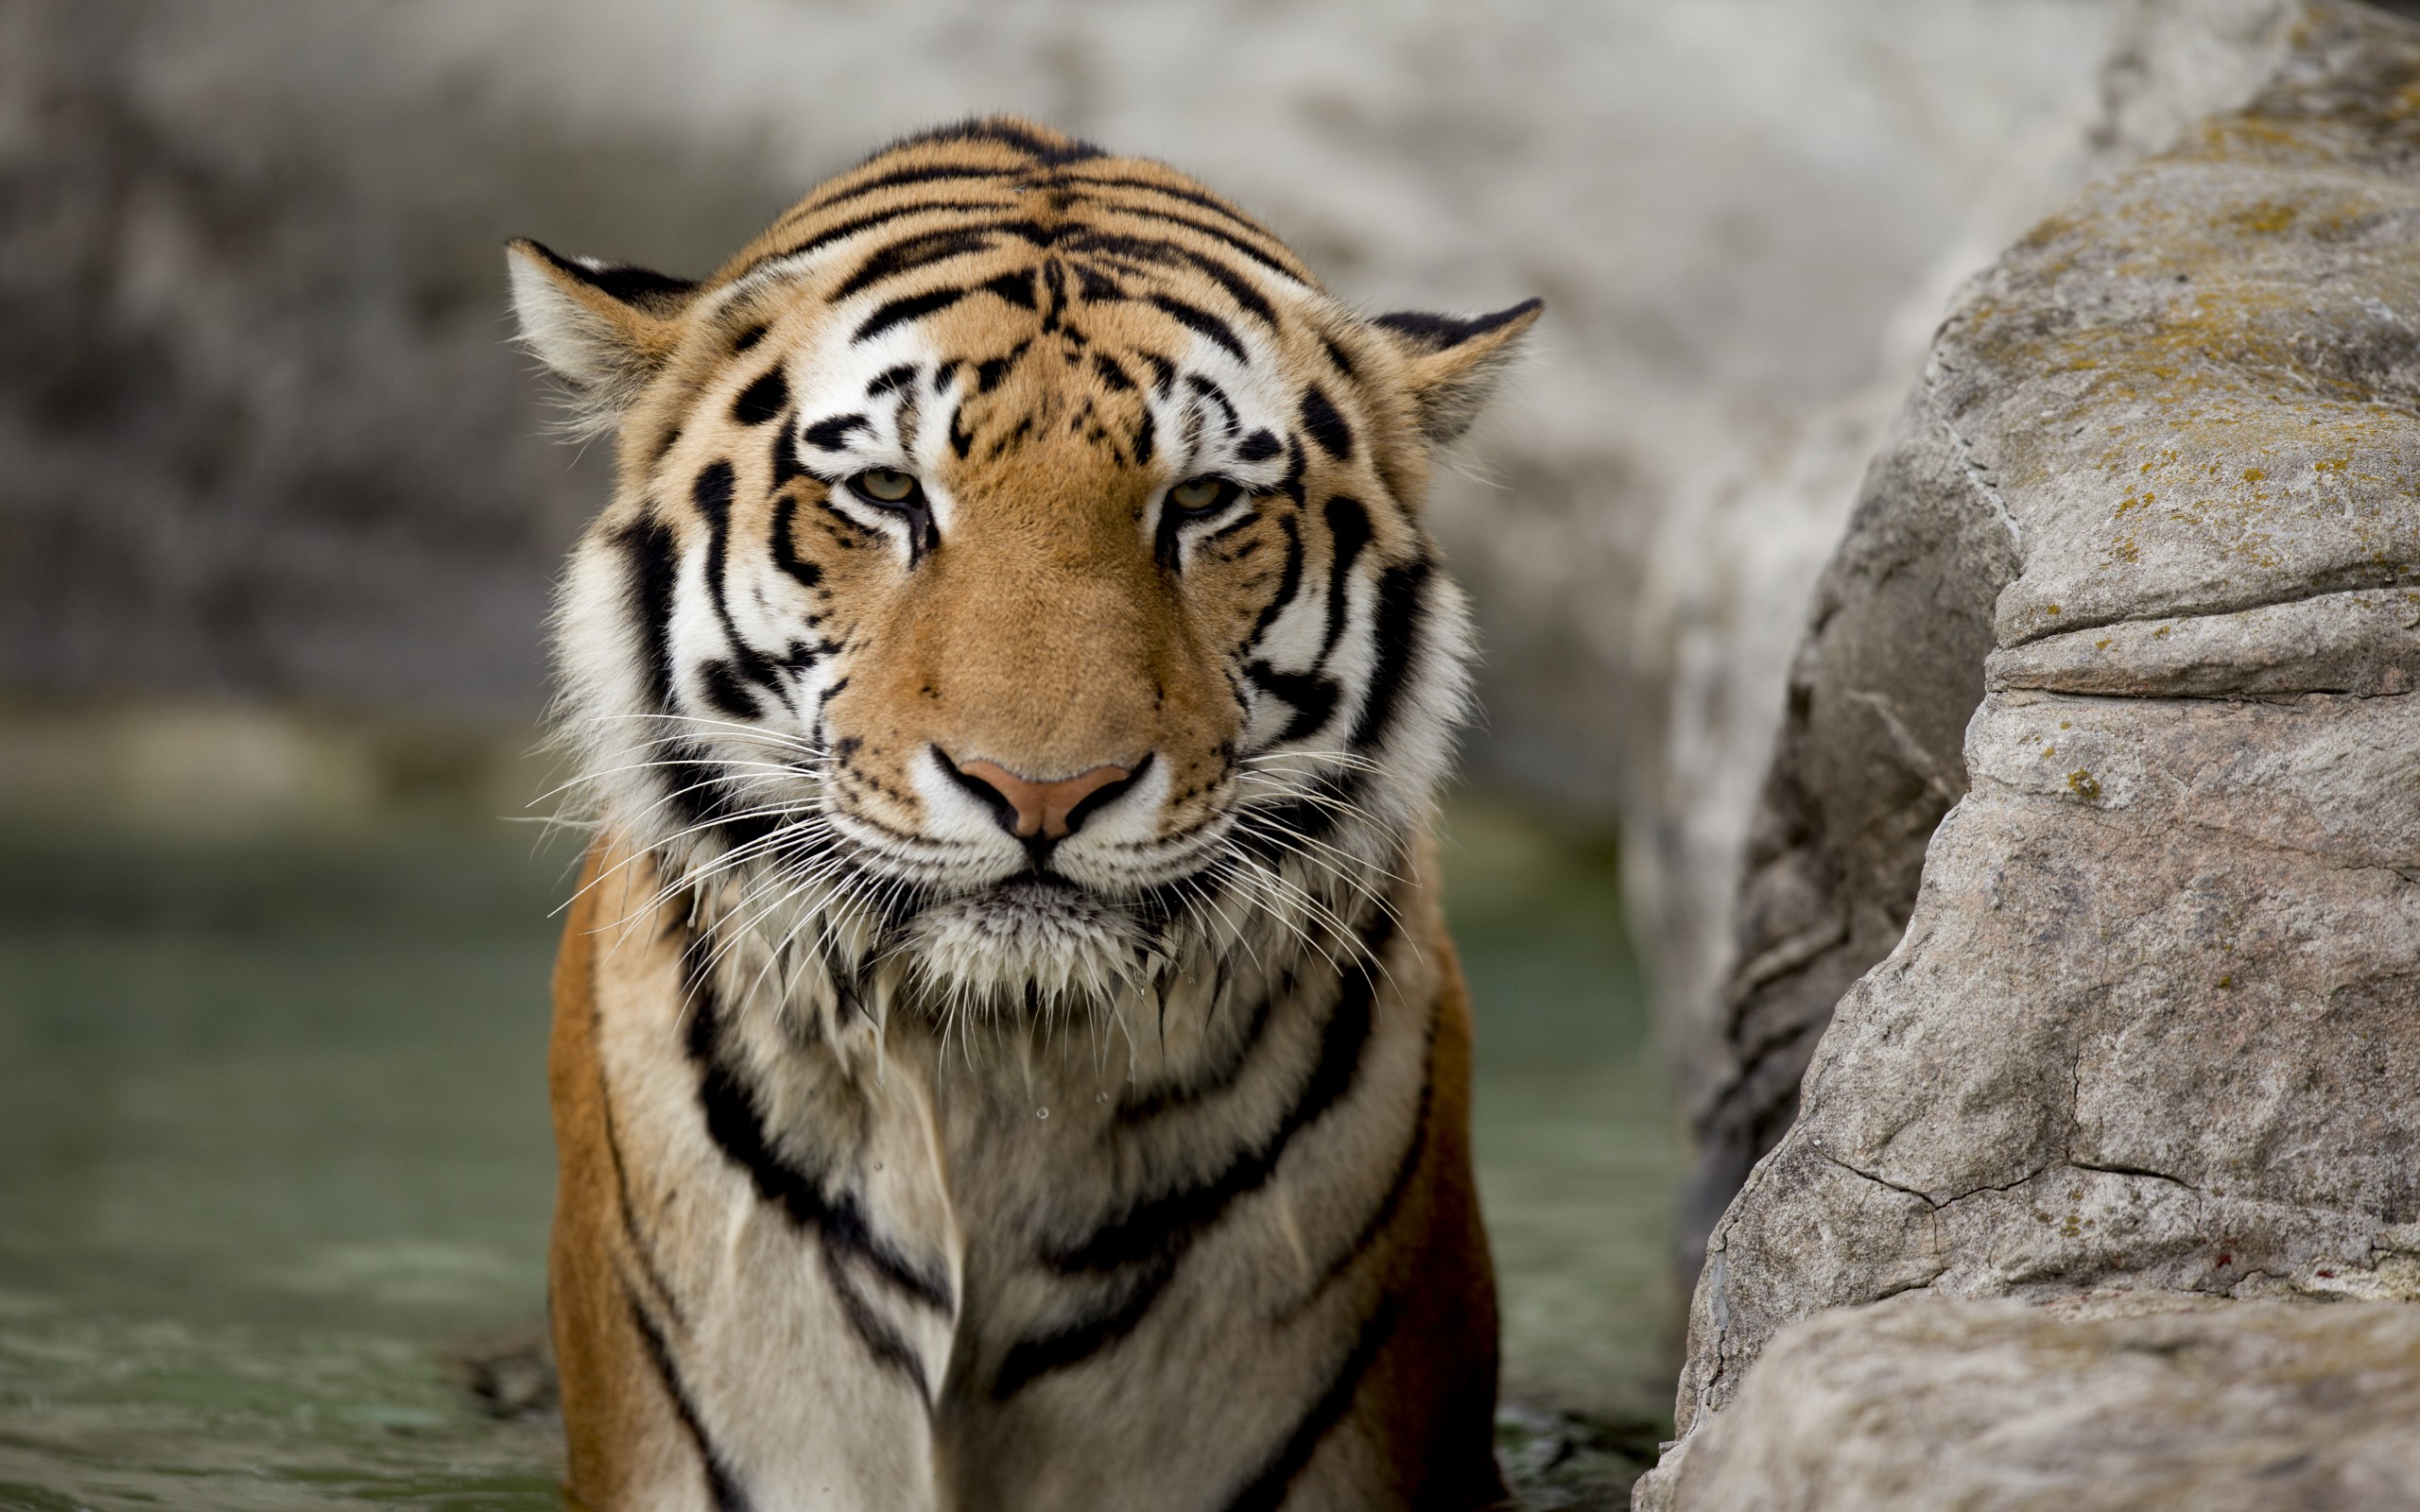 tigers, Bathing, Camouflage, Backgrounds, Bengal, Tigers, Captivity, Poker, Face Wallpaper